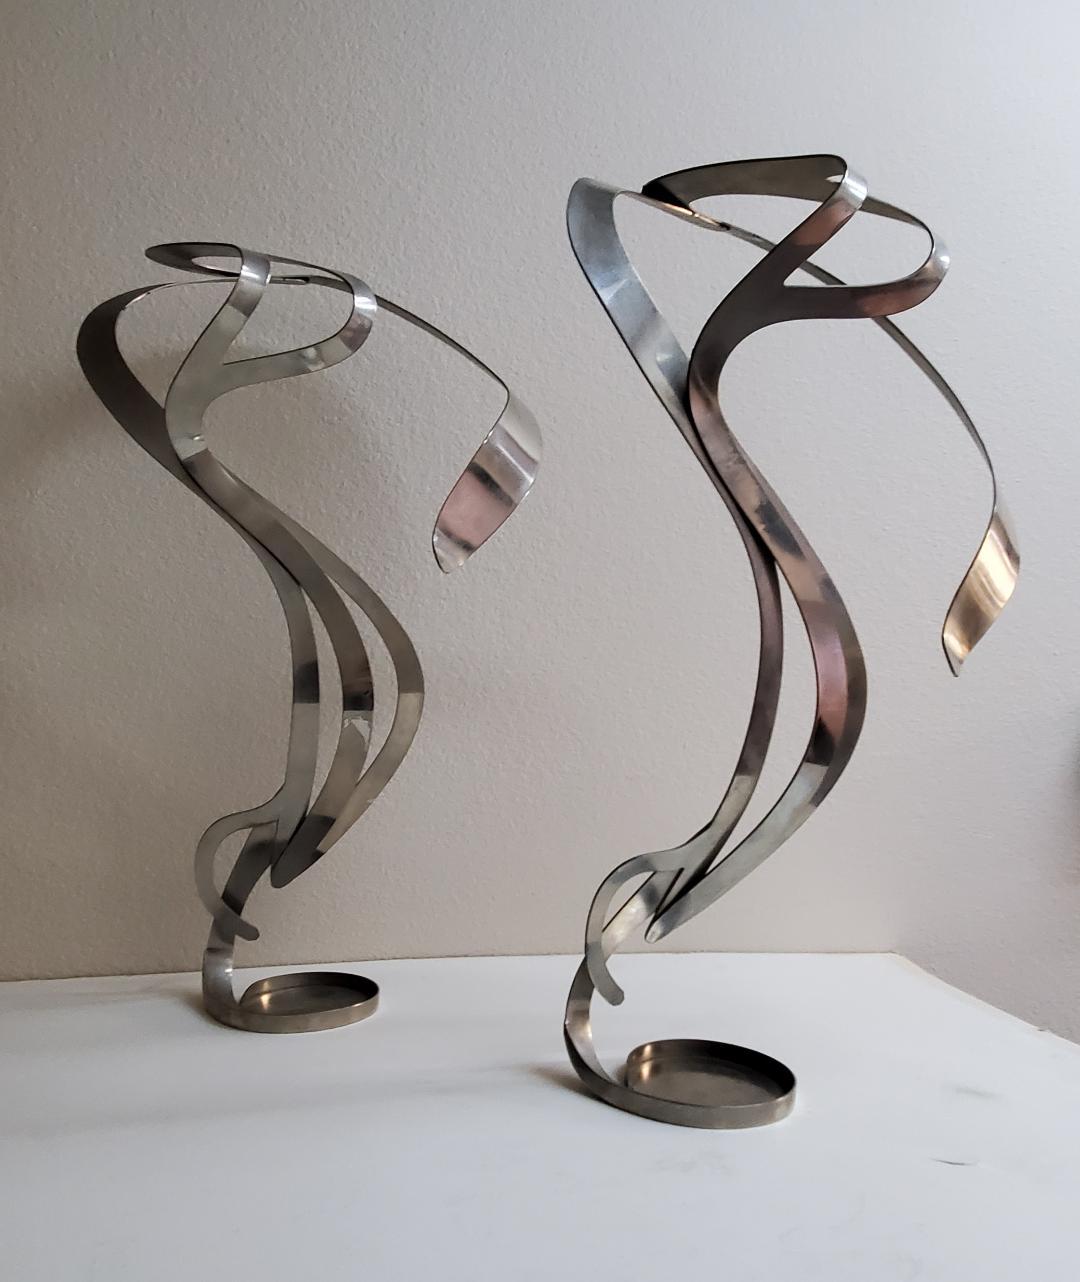 2 Art Nouveau Styled Candle Holders Crafted Into Swirling Twirling Metal Smoke  For Sale 8